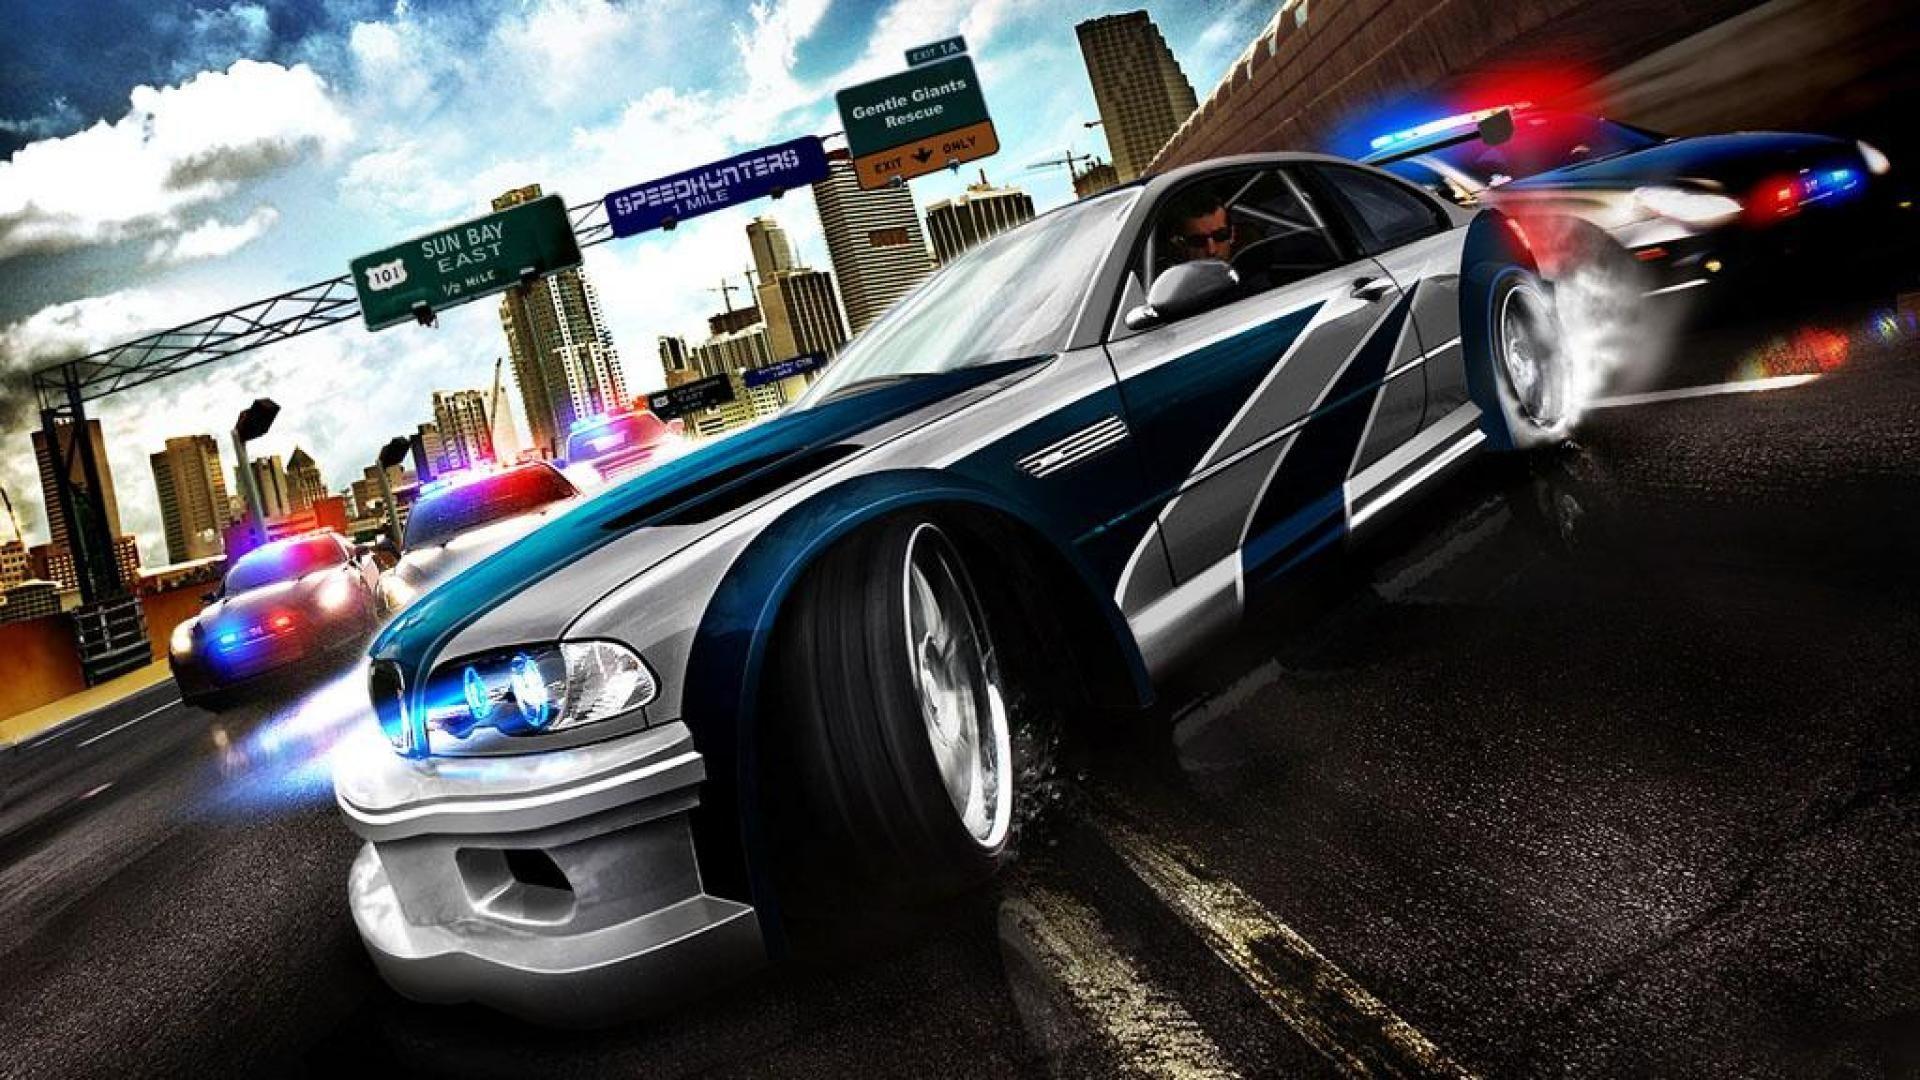 Need for speed most wanted 2005 обои